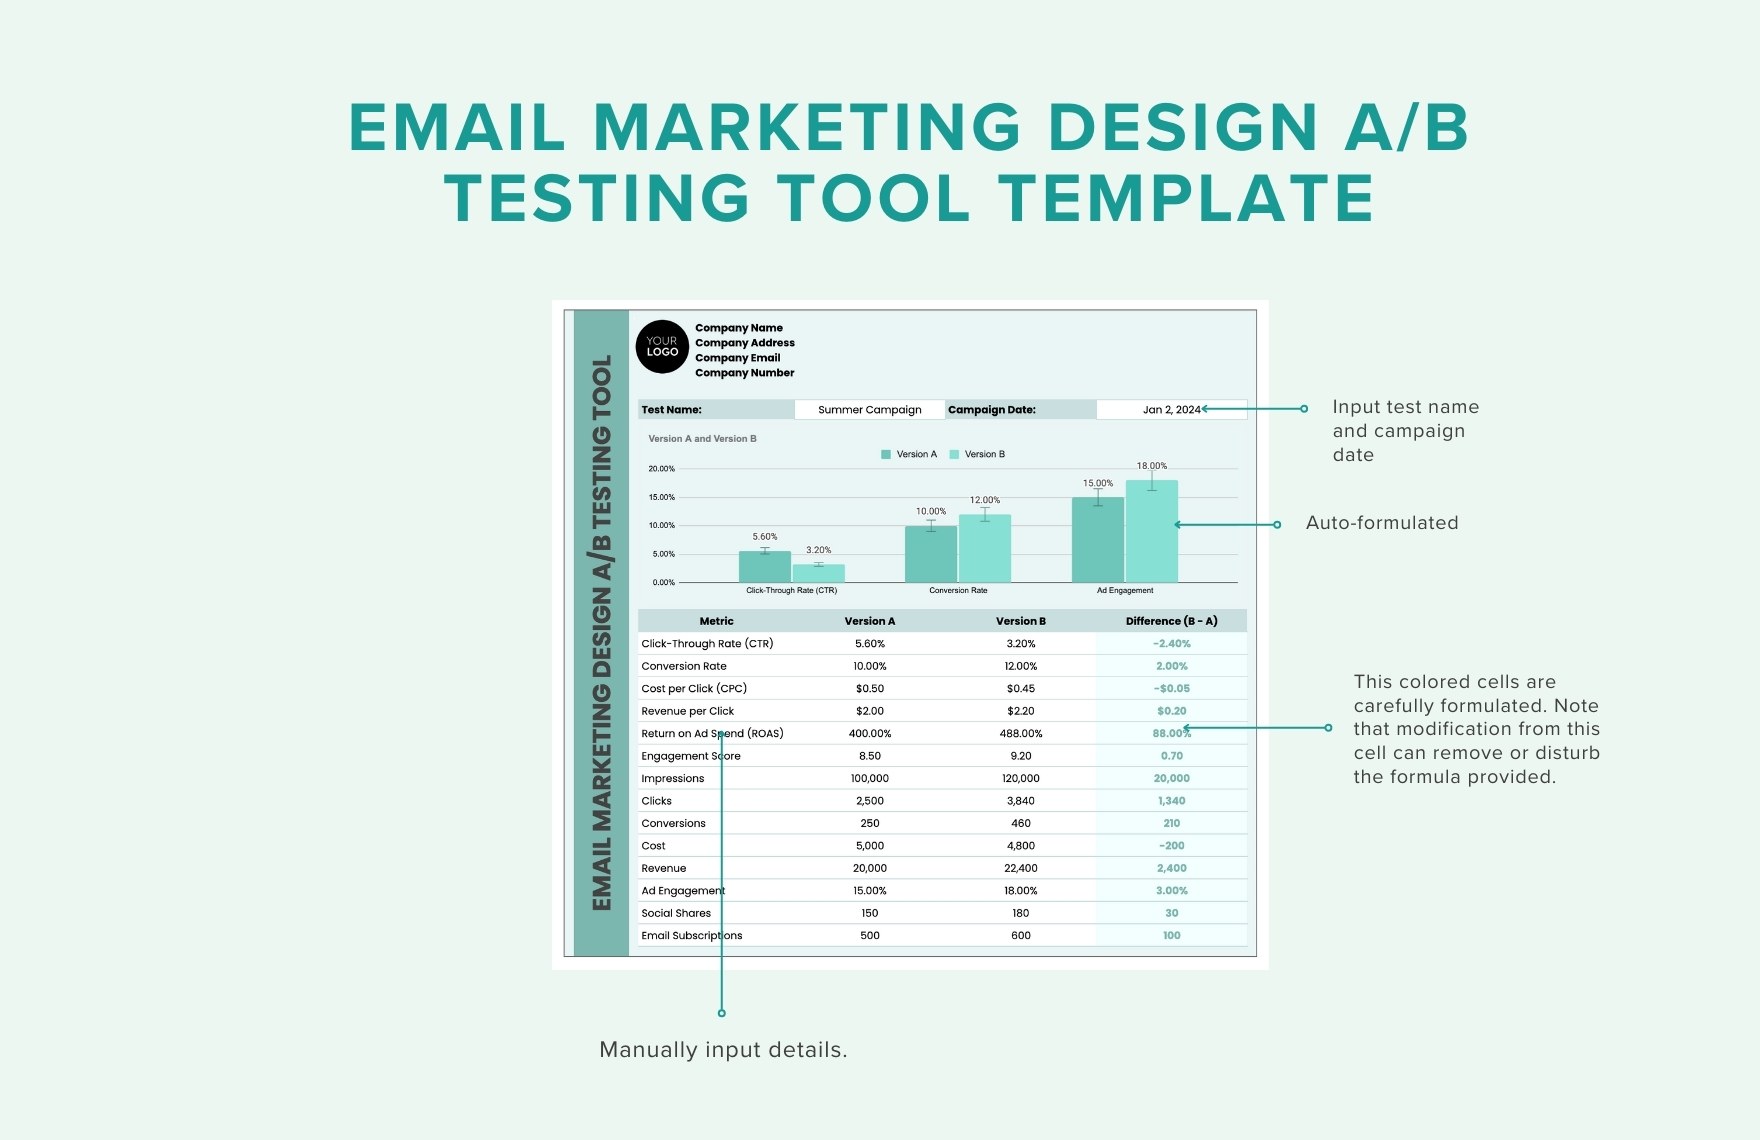 Email Marketing Design A/B Testing Tool Template